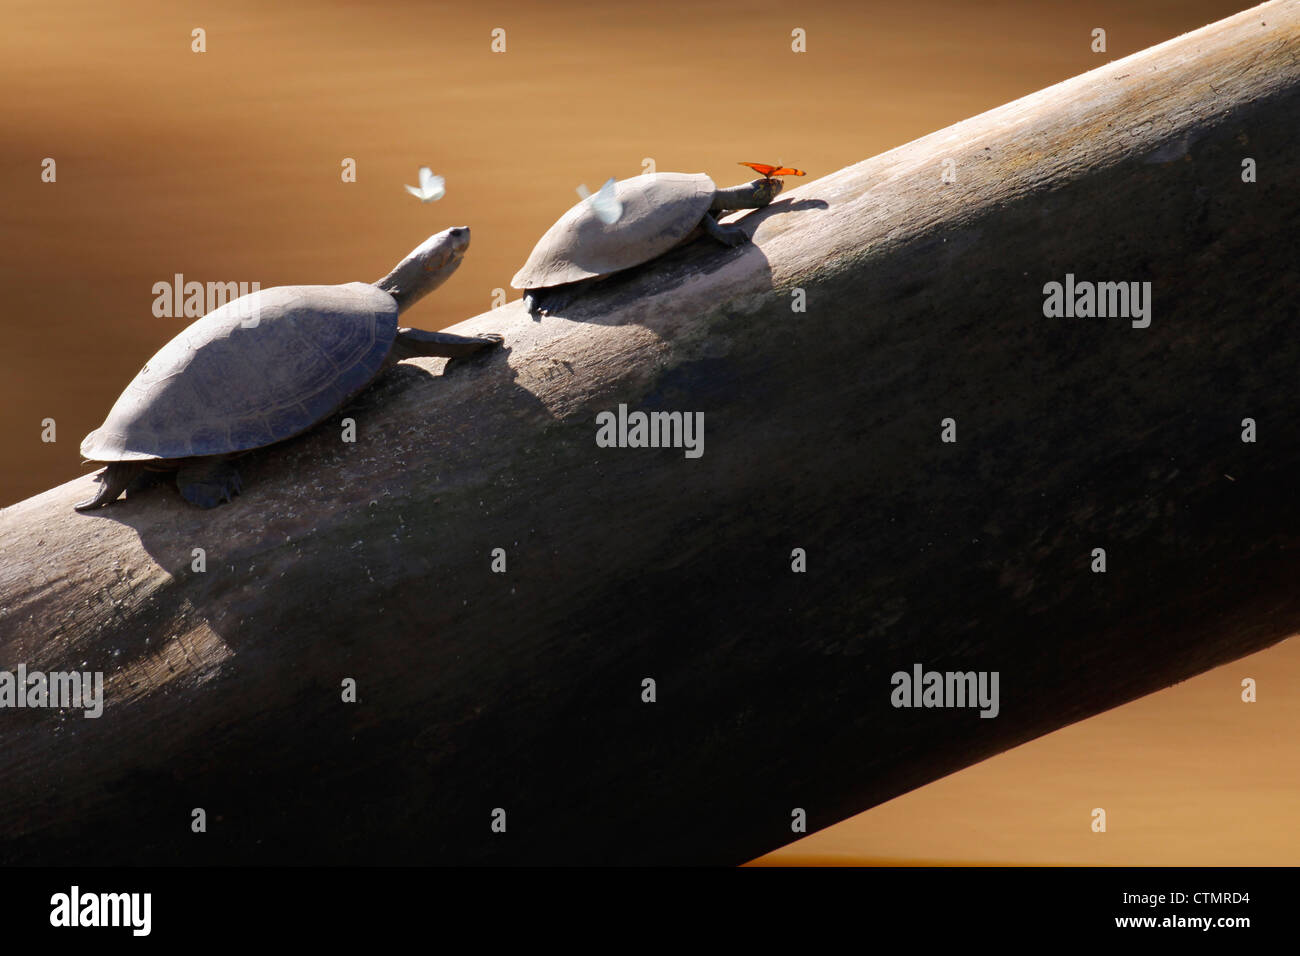 yellow-spotted Amazon river turtles , Tambopata National Reserve, Tambopata Province, Department of Madre de Dios, Peru Stock Photo